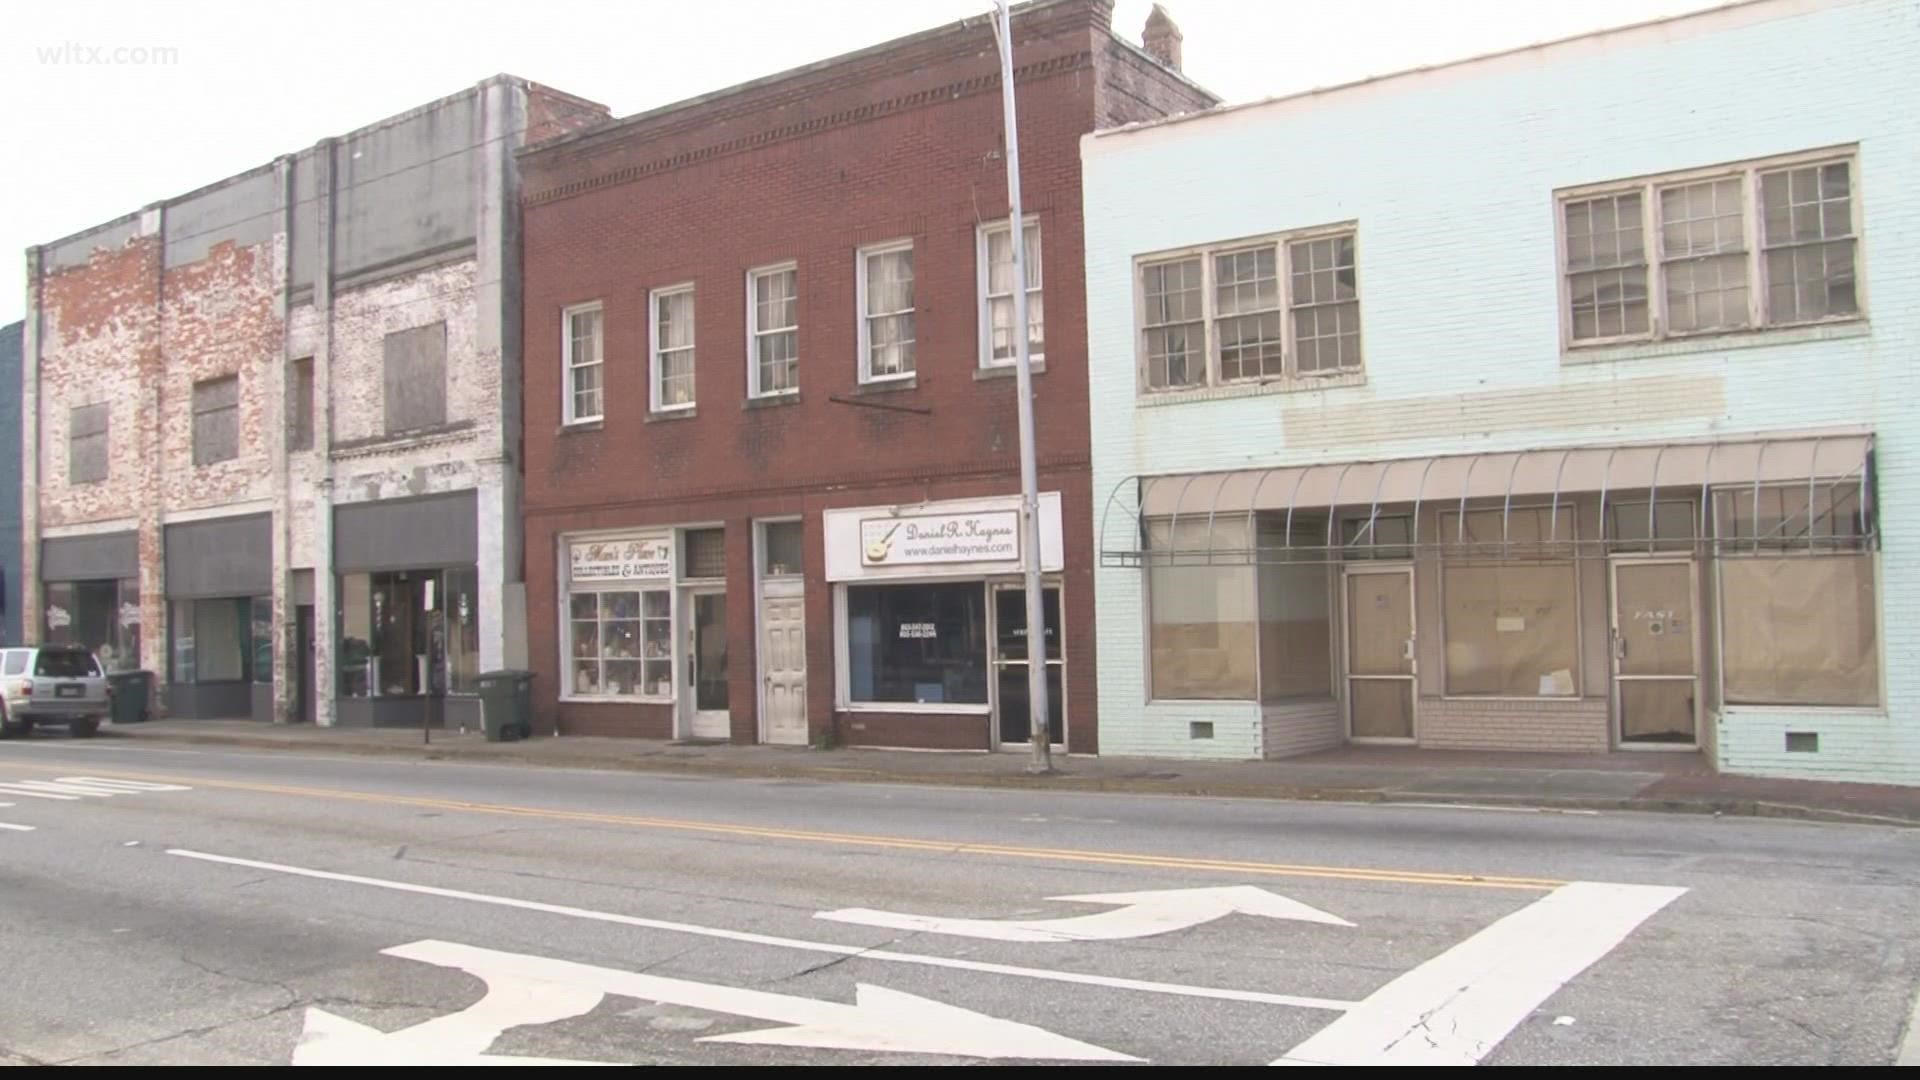 Residents in some rural communities like Orangeburg want to see more development and revitalization in their community.